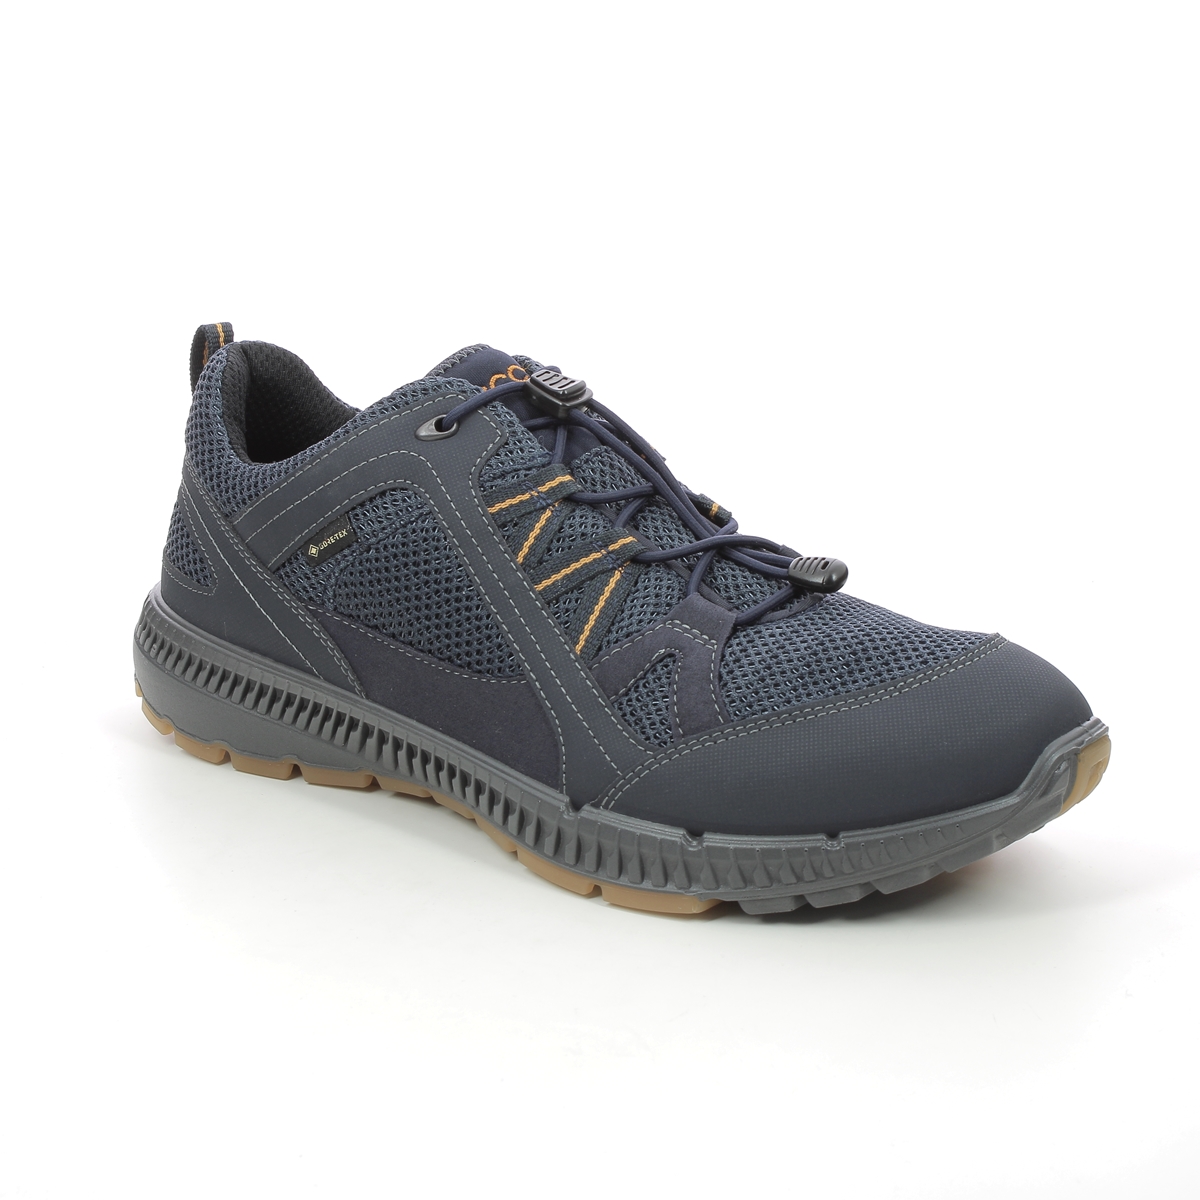 Ecco Terracruise Gtx Navy Mens Trainers 843064-51241 In Size 42 In Plain Navy